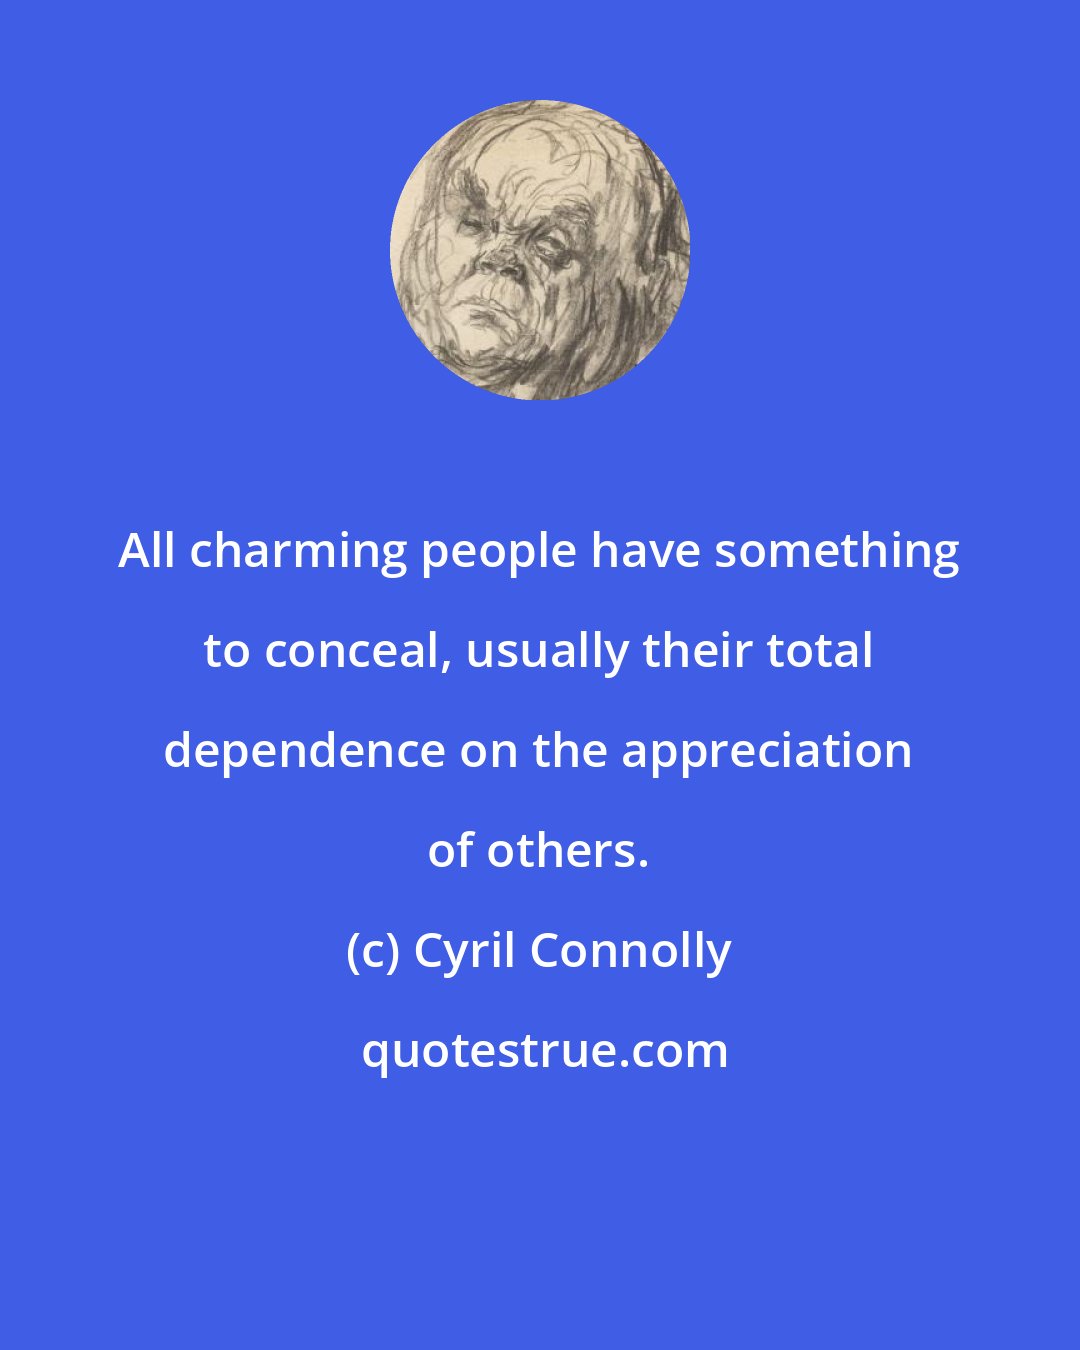 Cyril Connolly: All charming people have something to conceal, usually their total dependence on the appreciation of others.